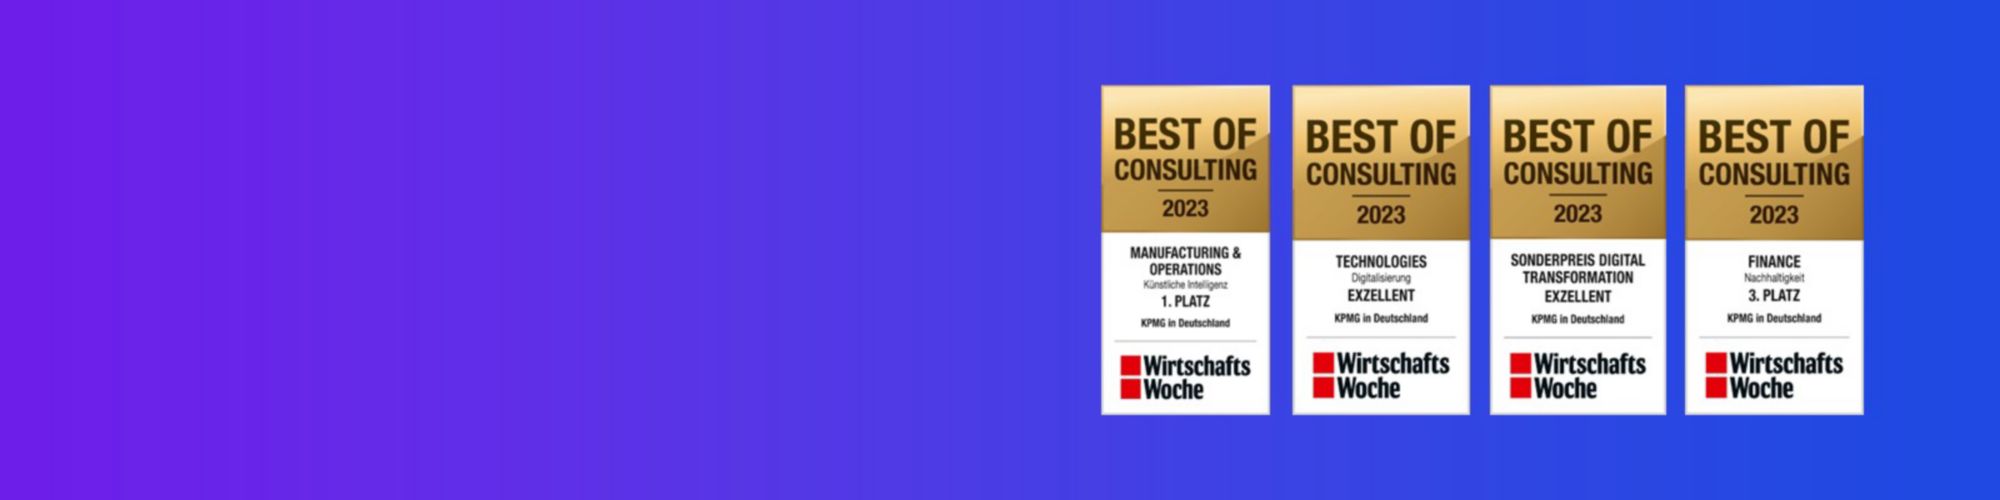 Best of Consulting 2023 Logo